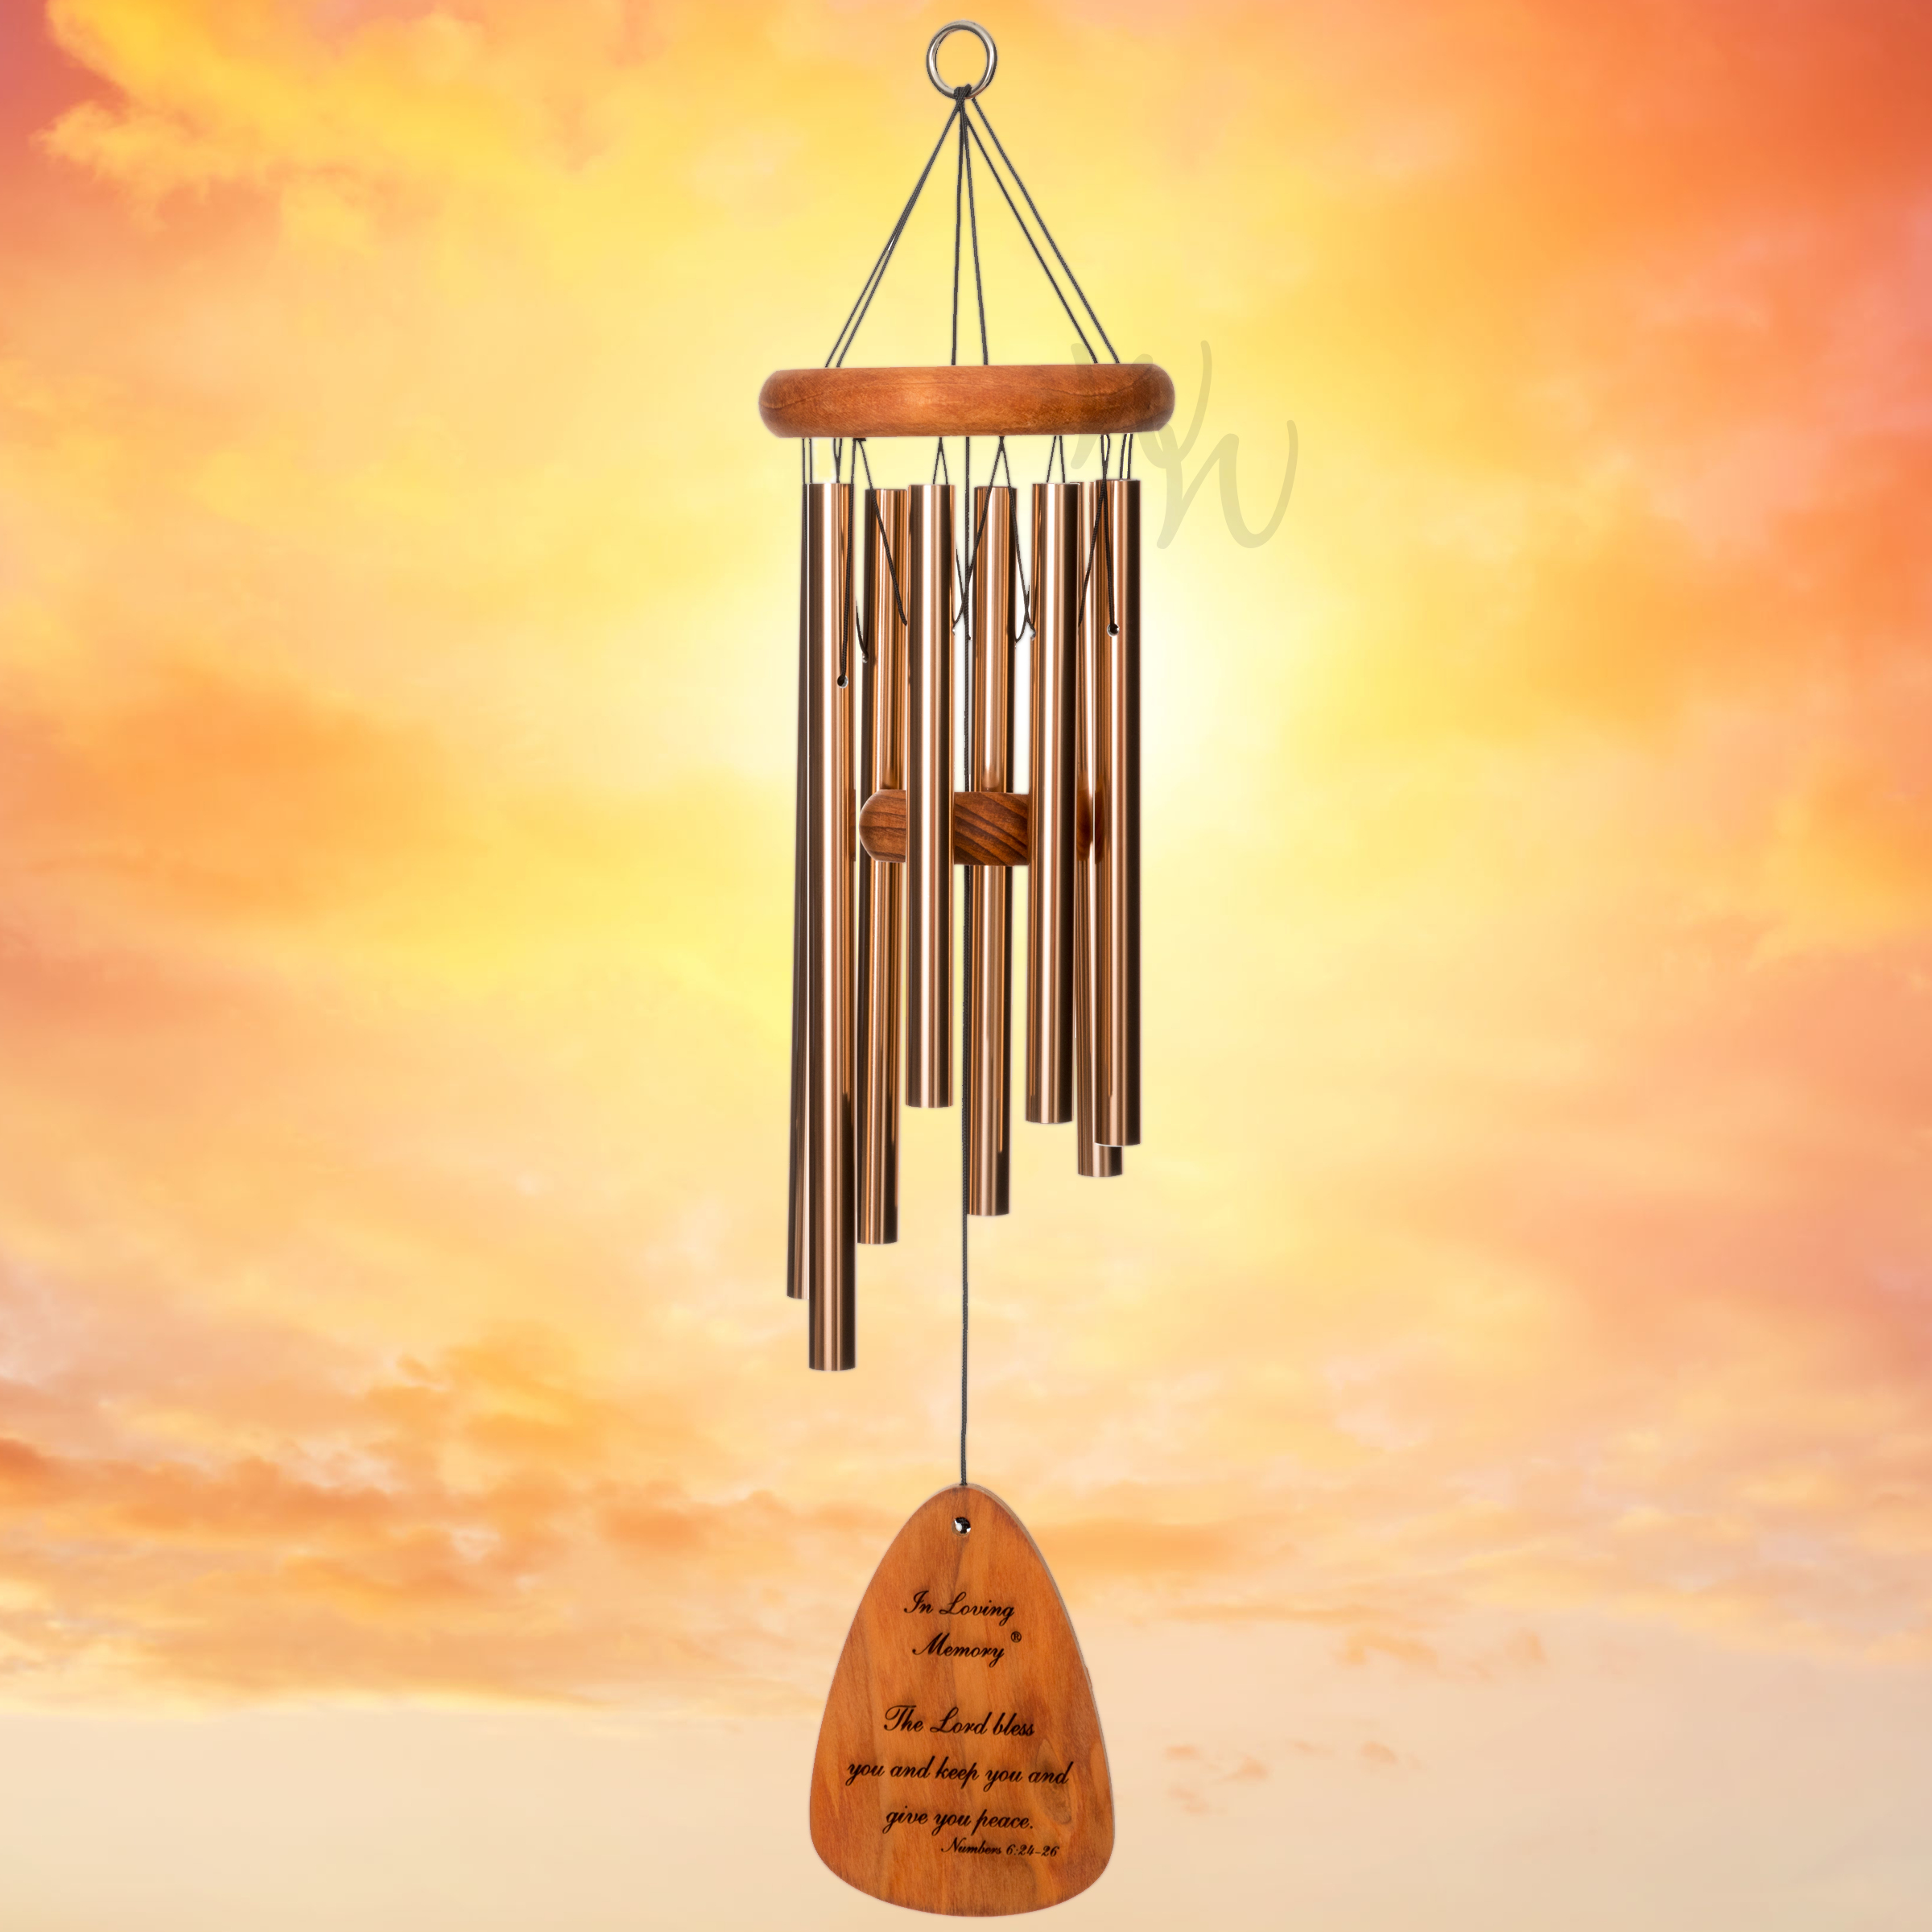 In Loving Memory 24 Inch Windchime - The Lord bless you.. in Bronze